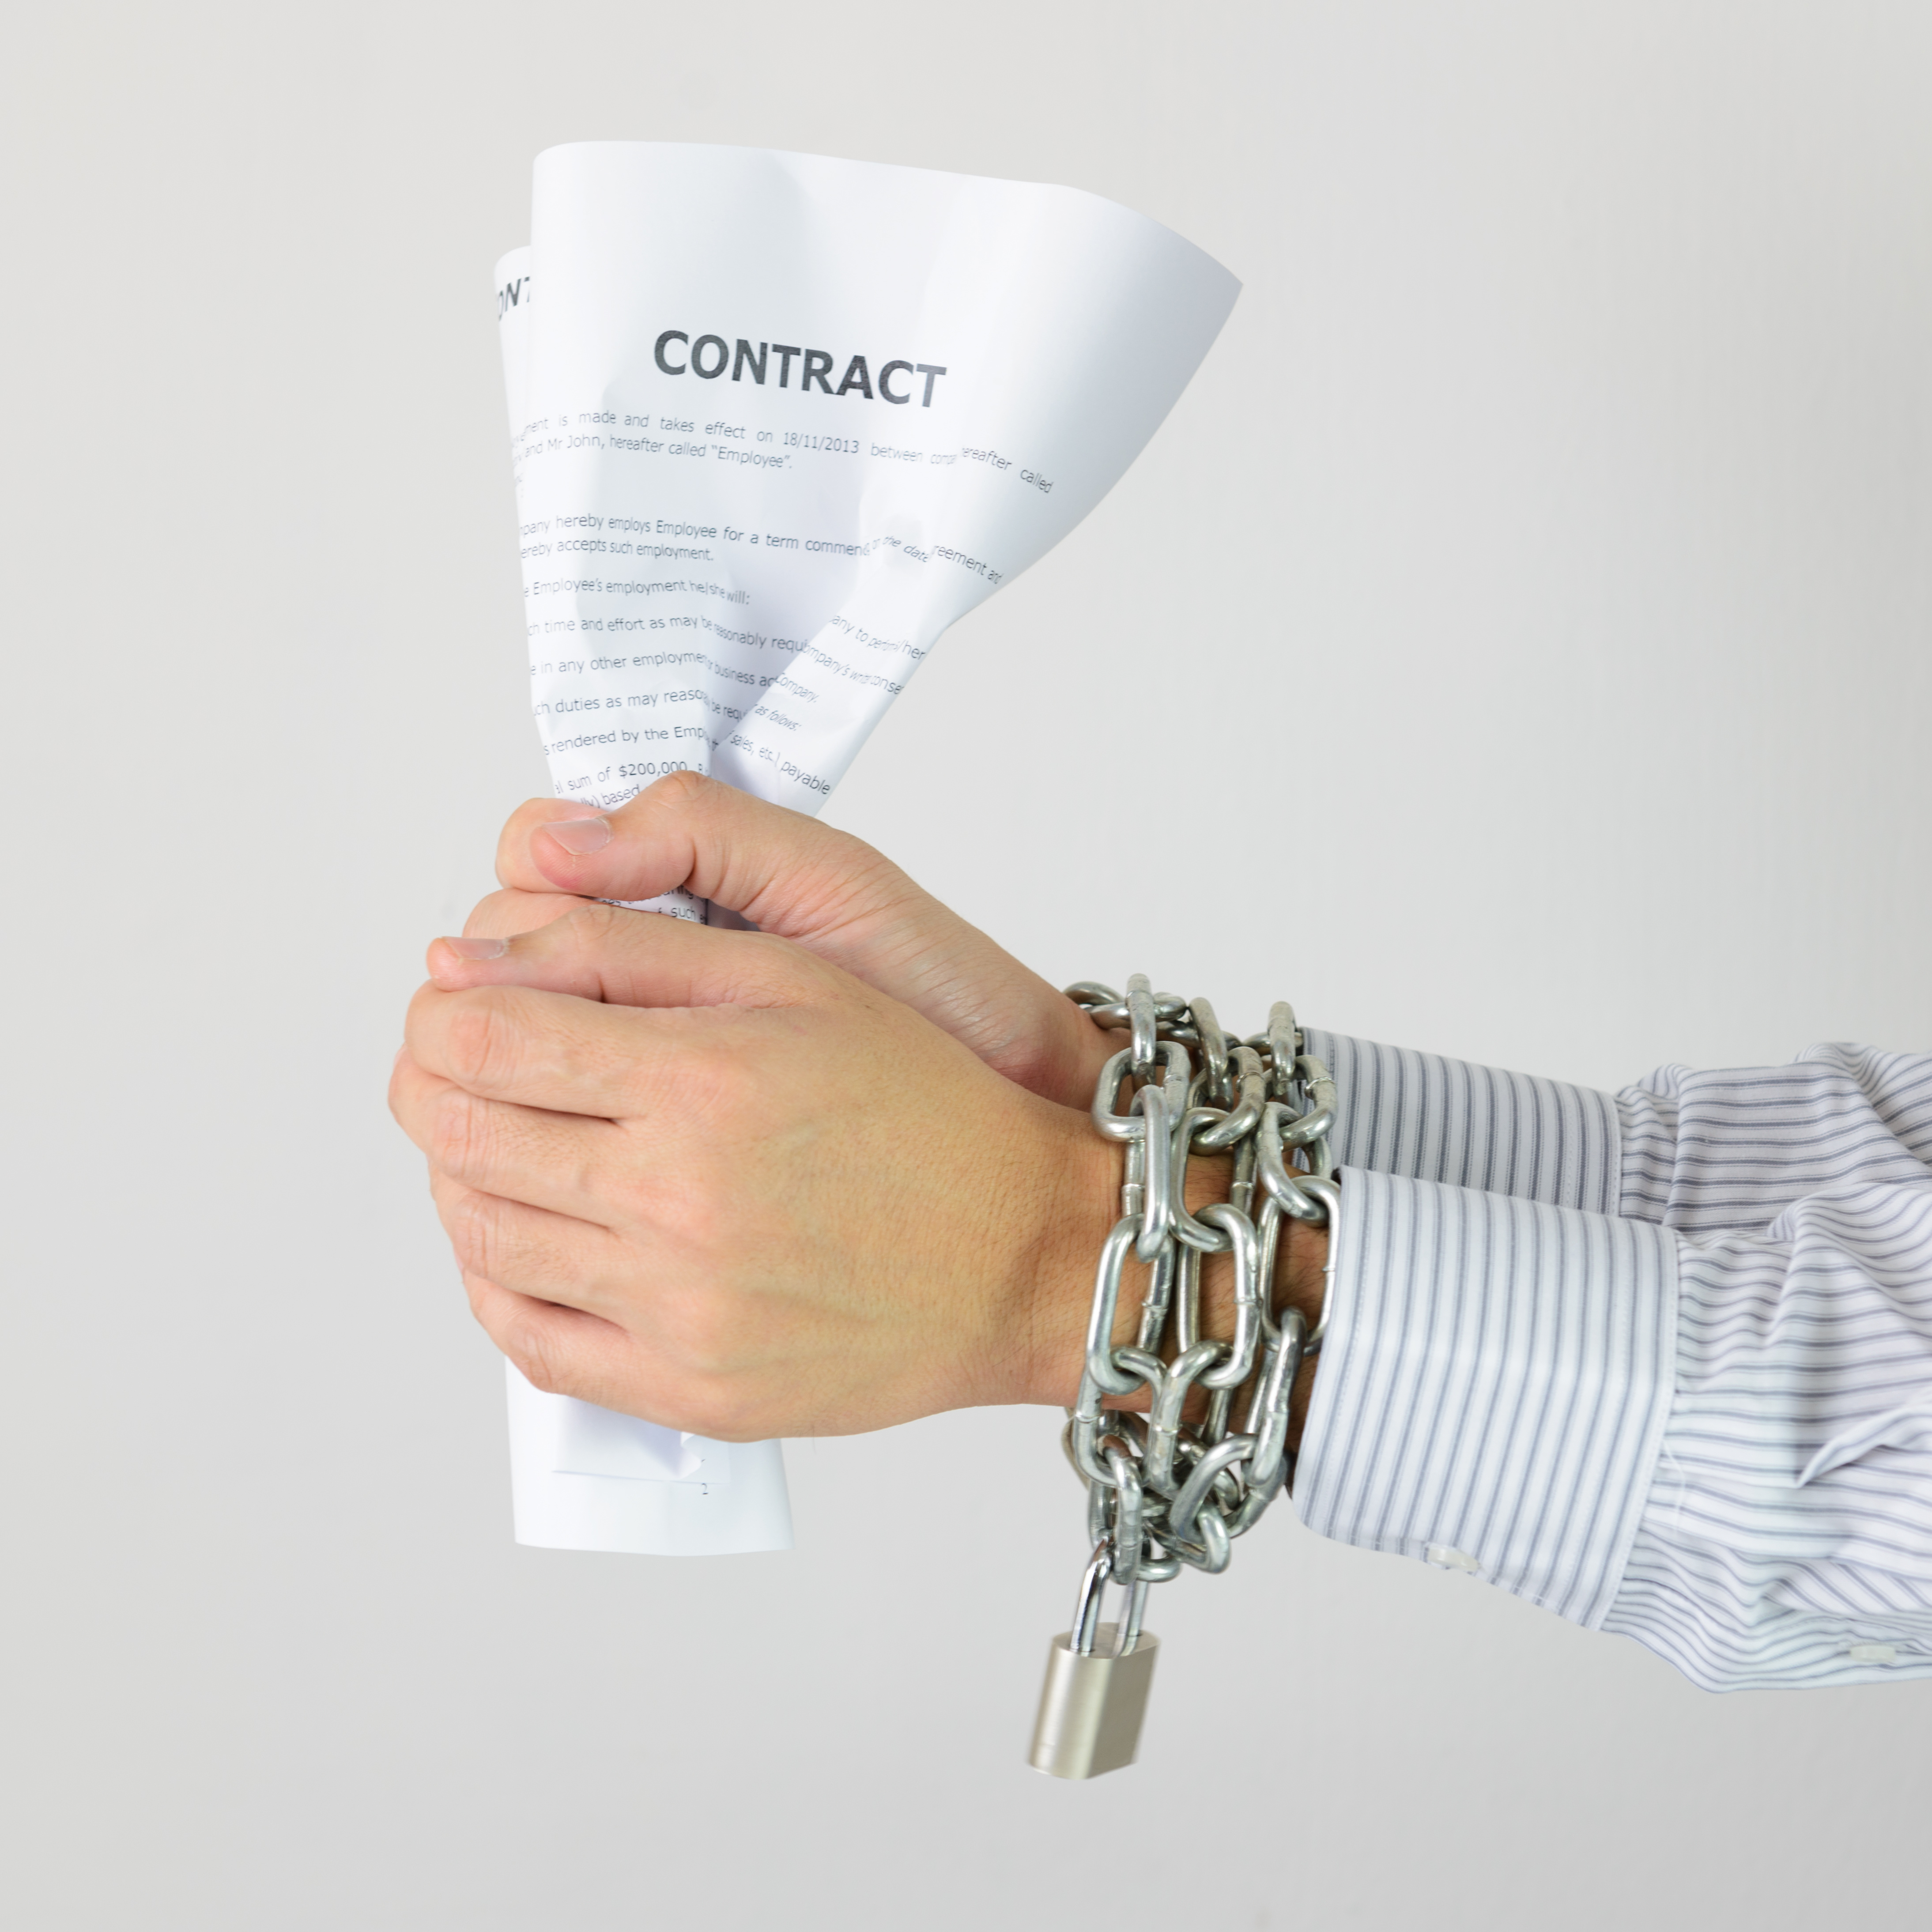 NON-SOLICITATION CLAUSES IN FLORIDA CONTRACTS